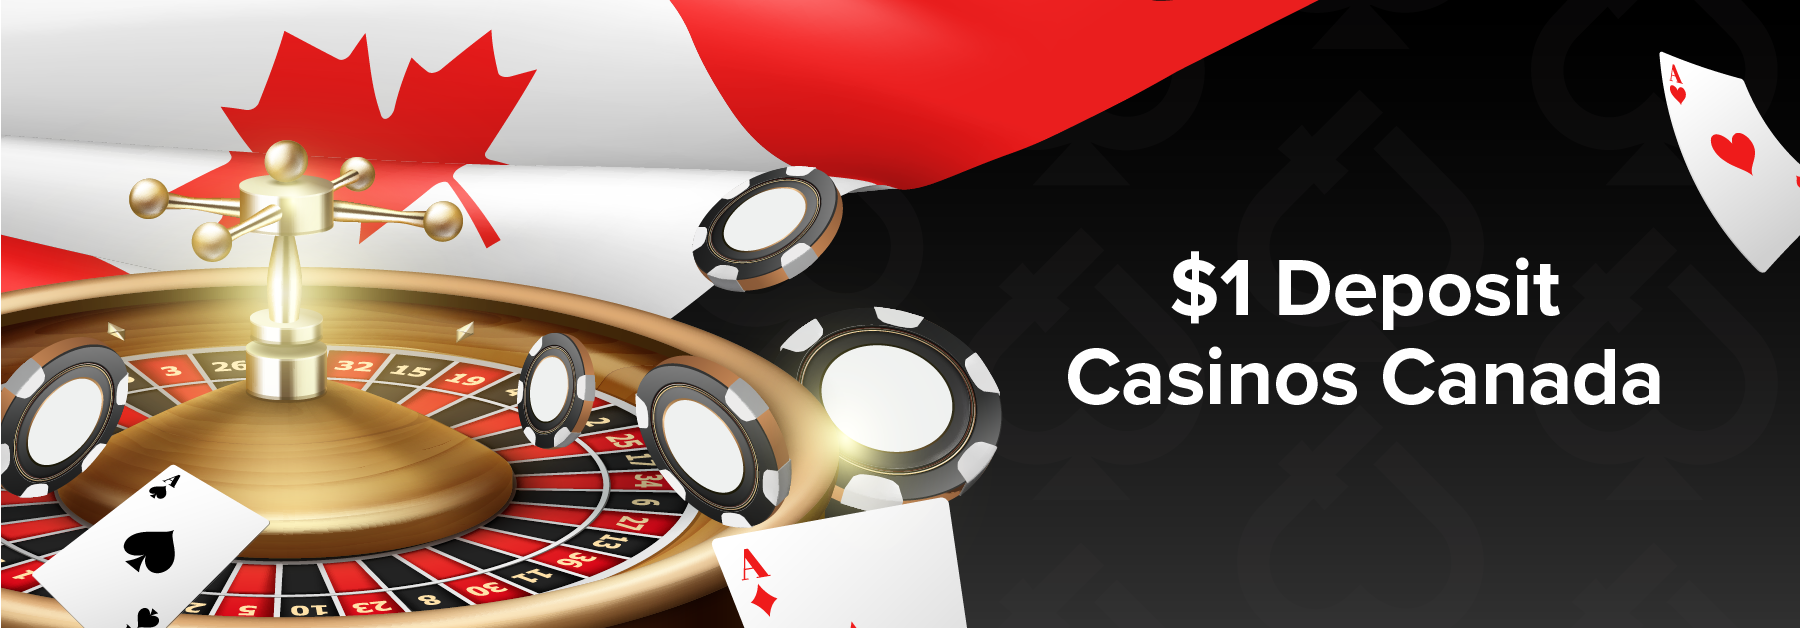 Building Relationships With 150 Free Spins For $1 Canada